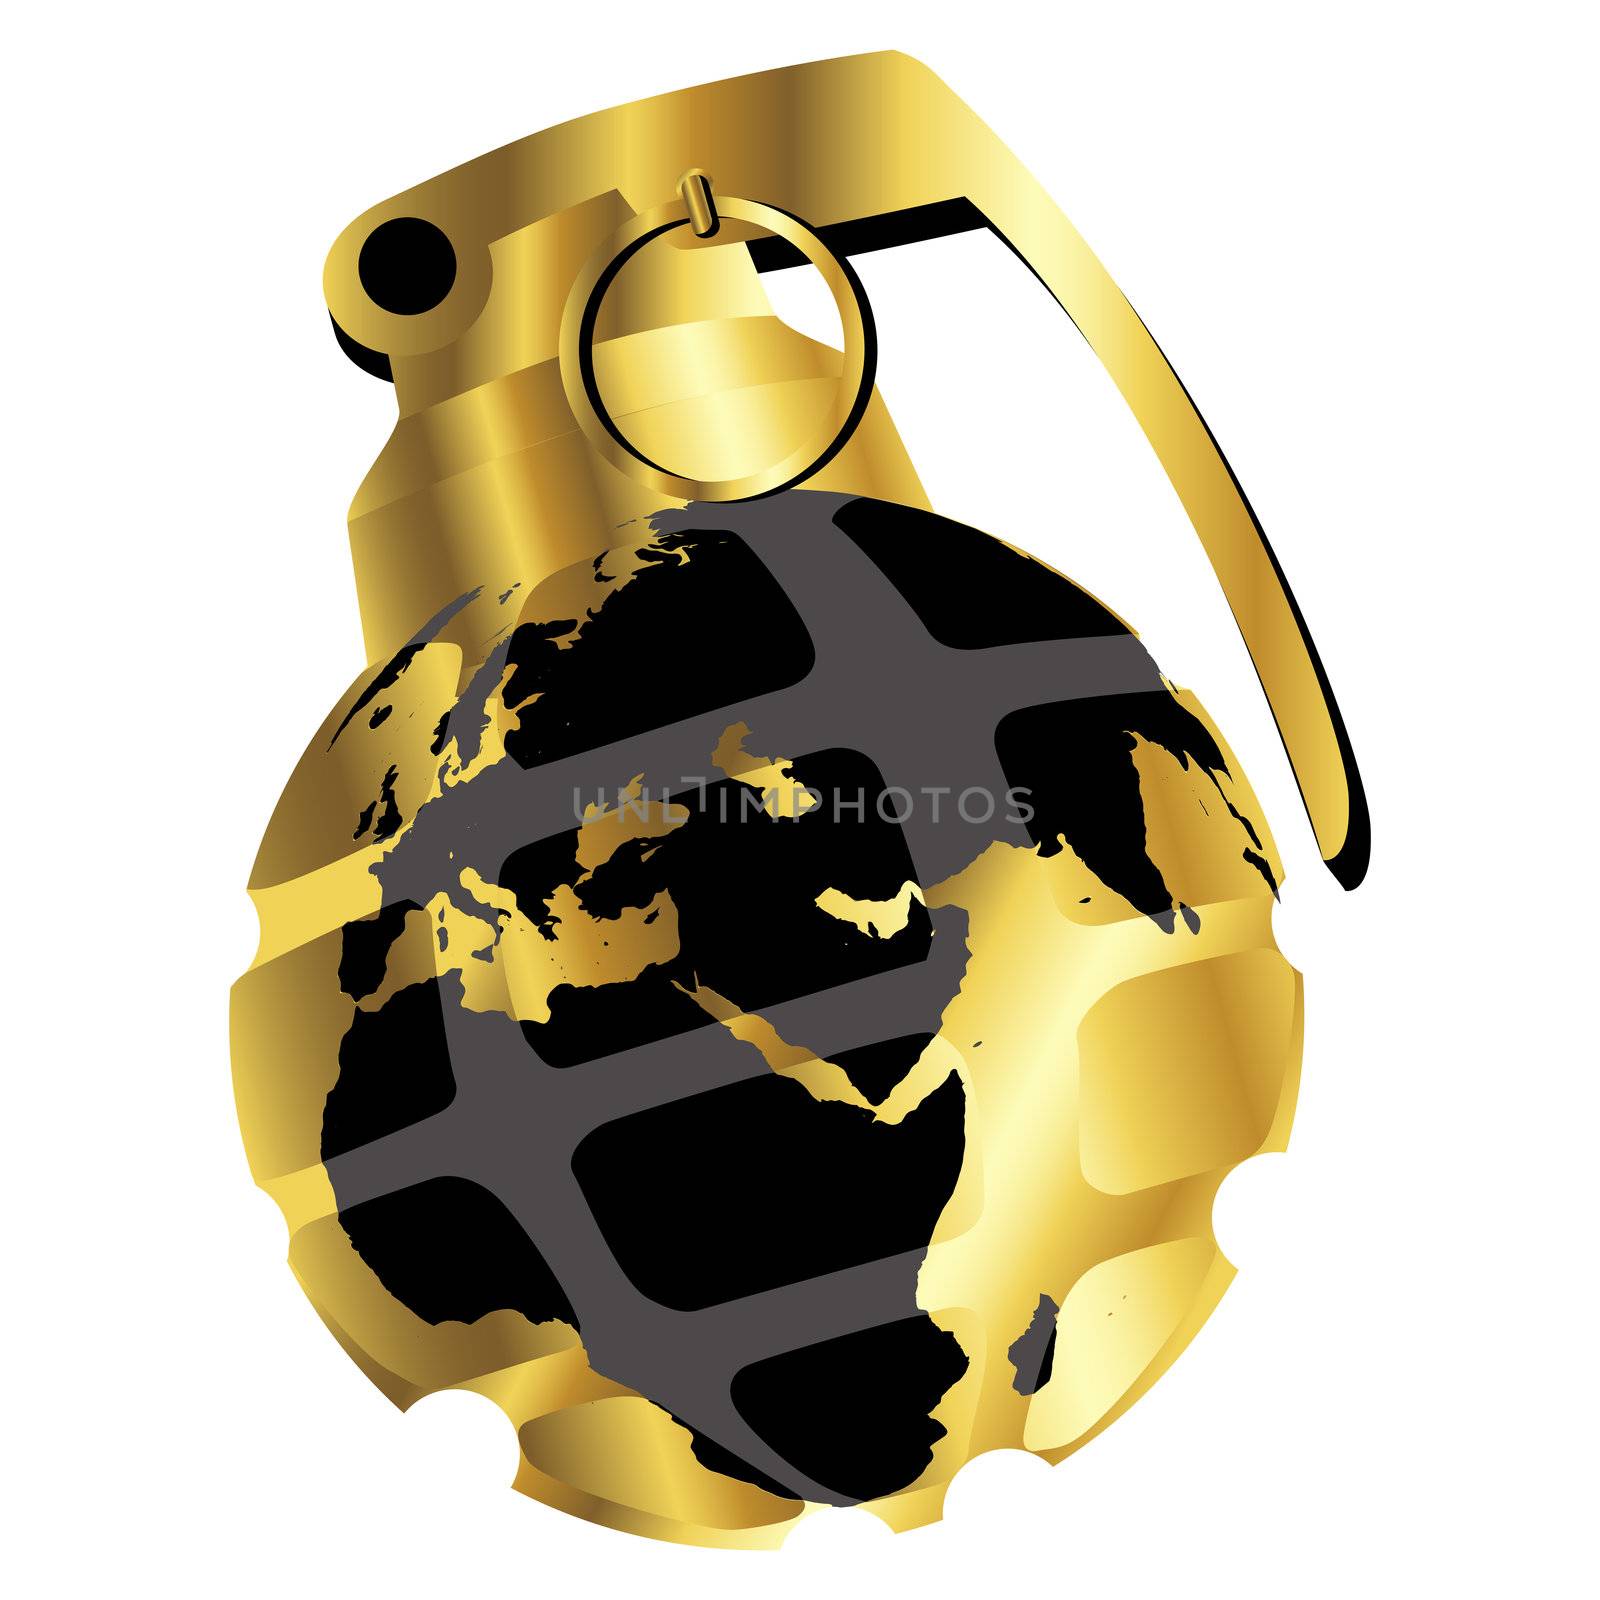 Stylized hand grenade with globe map in gold